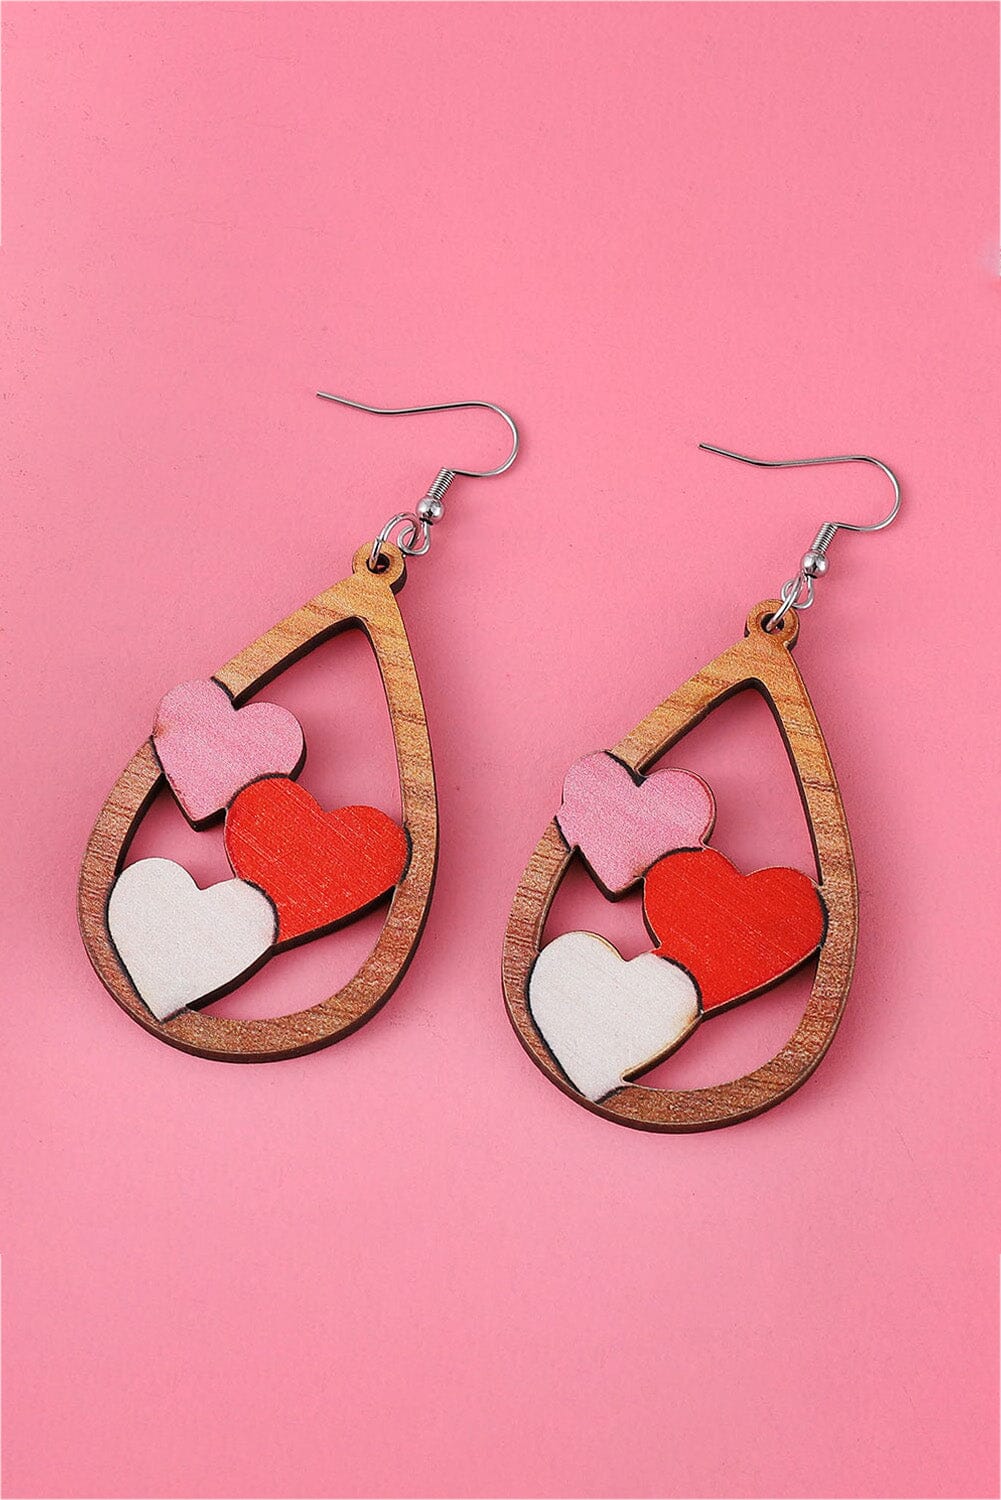 Madly in Love Earrings Jewelry Lover 